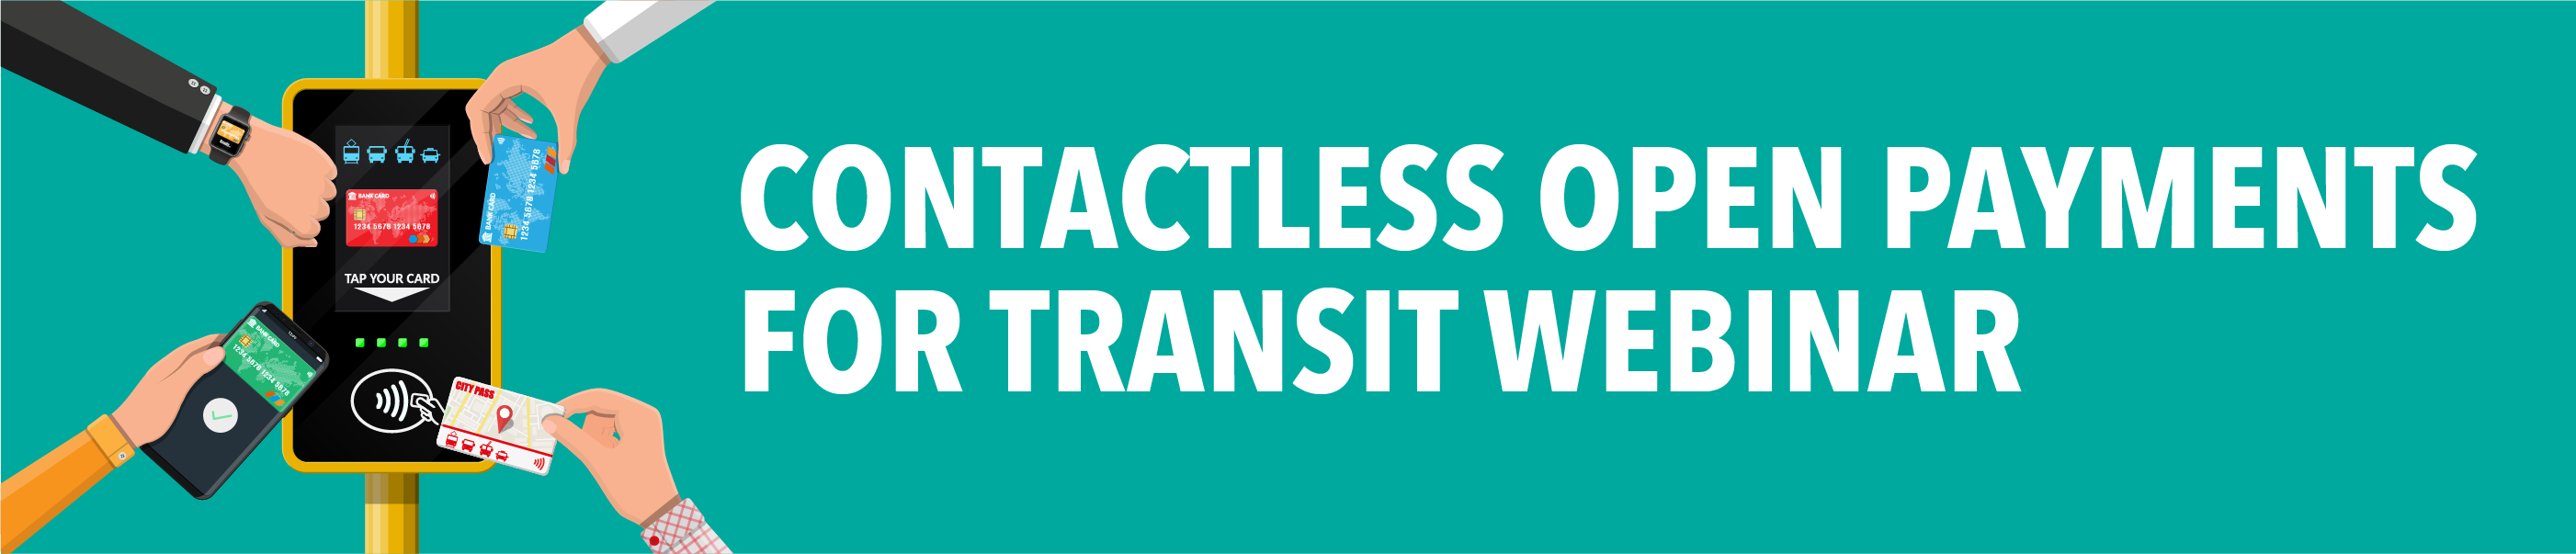 Contactless Open Payments for Transit Webinar